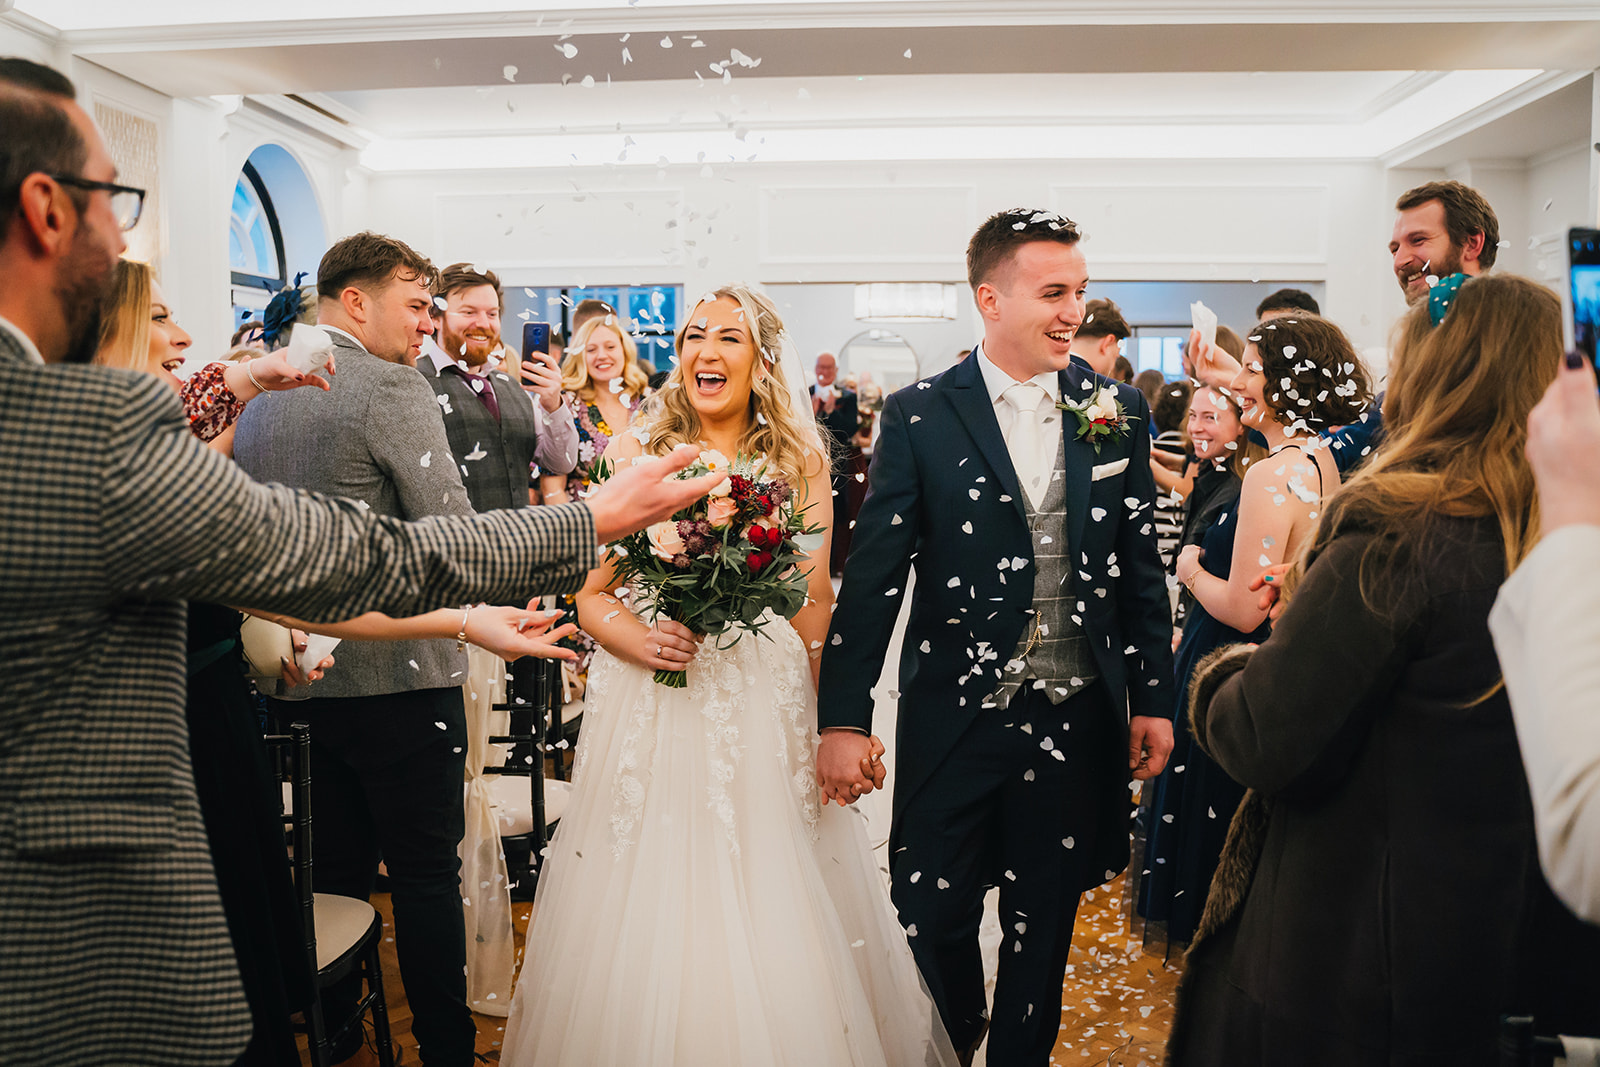 guests throw confetti over the newly-weds